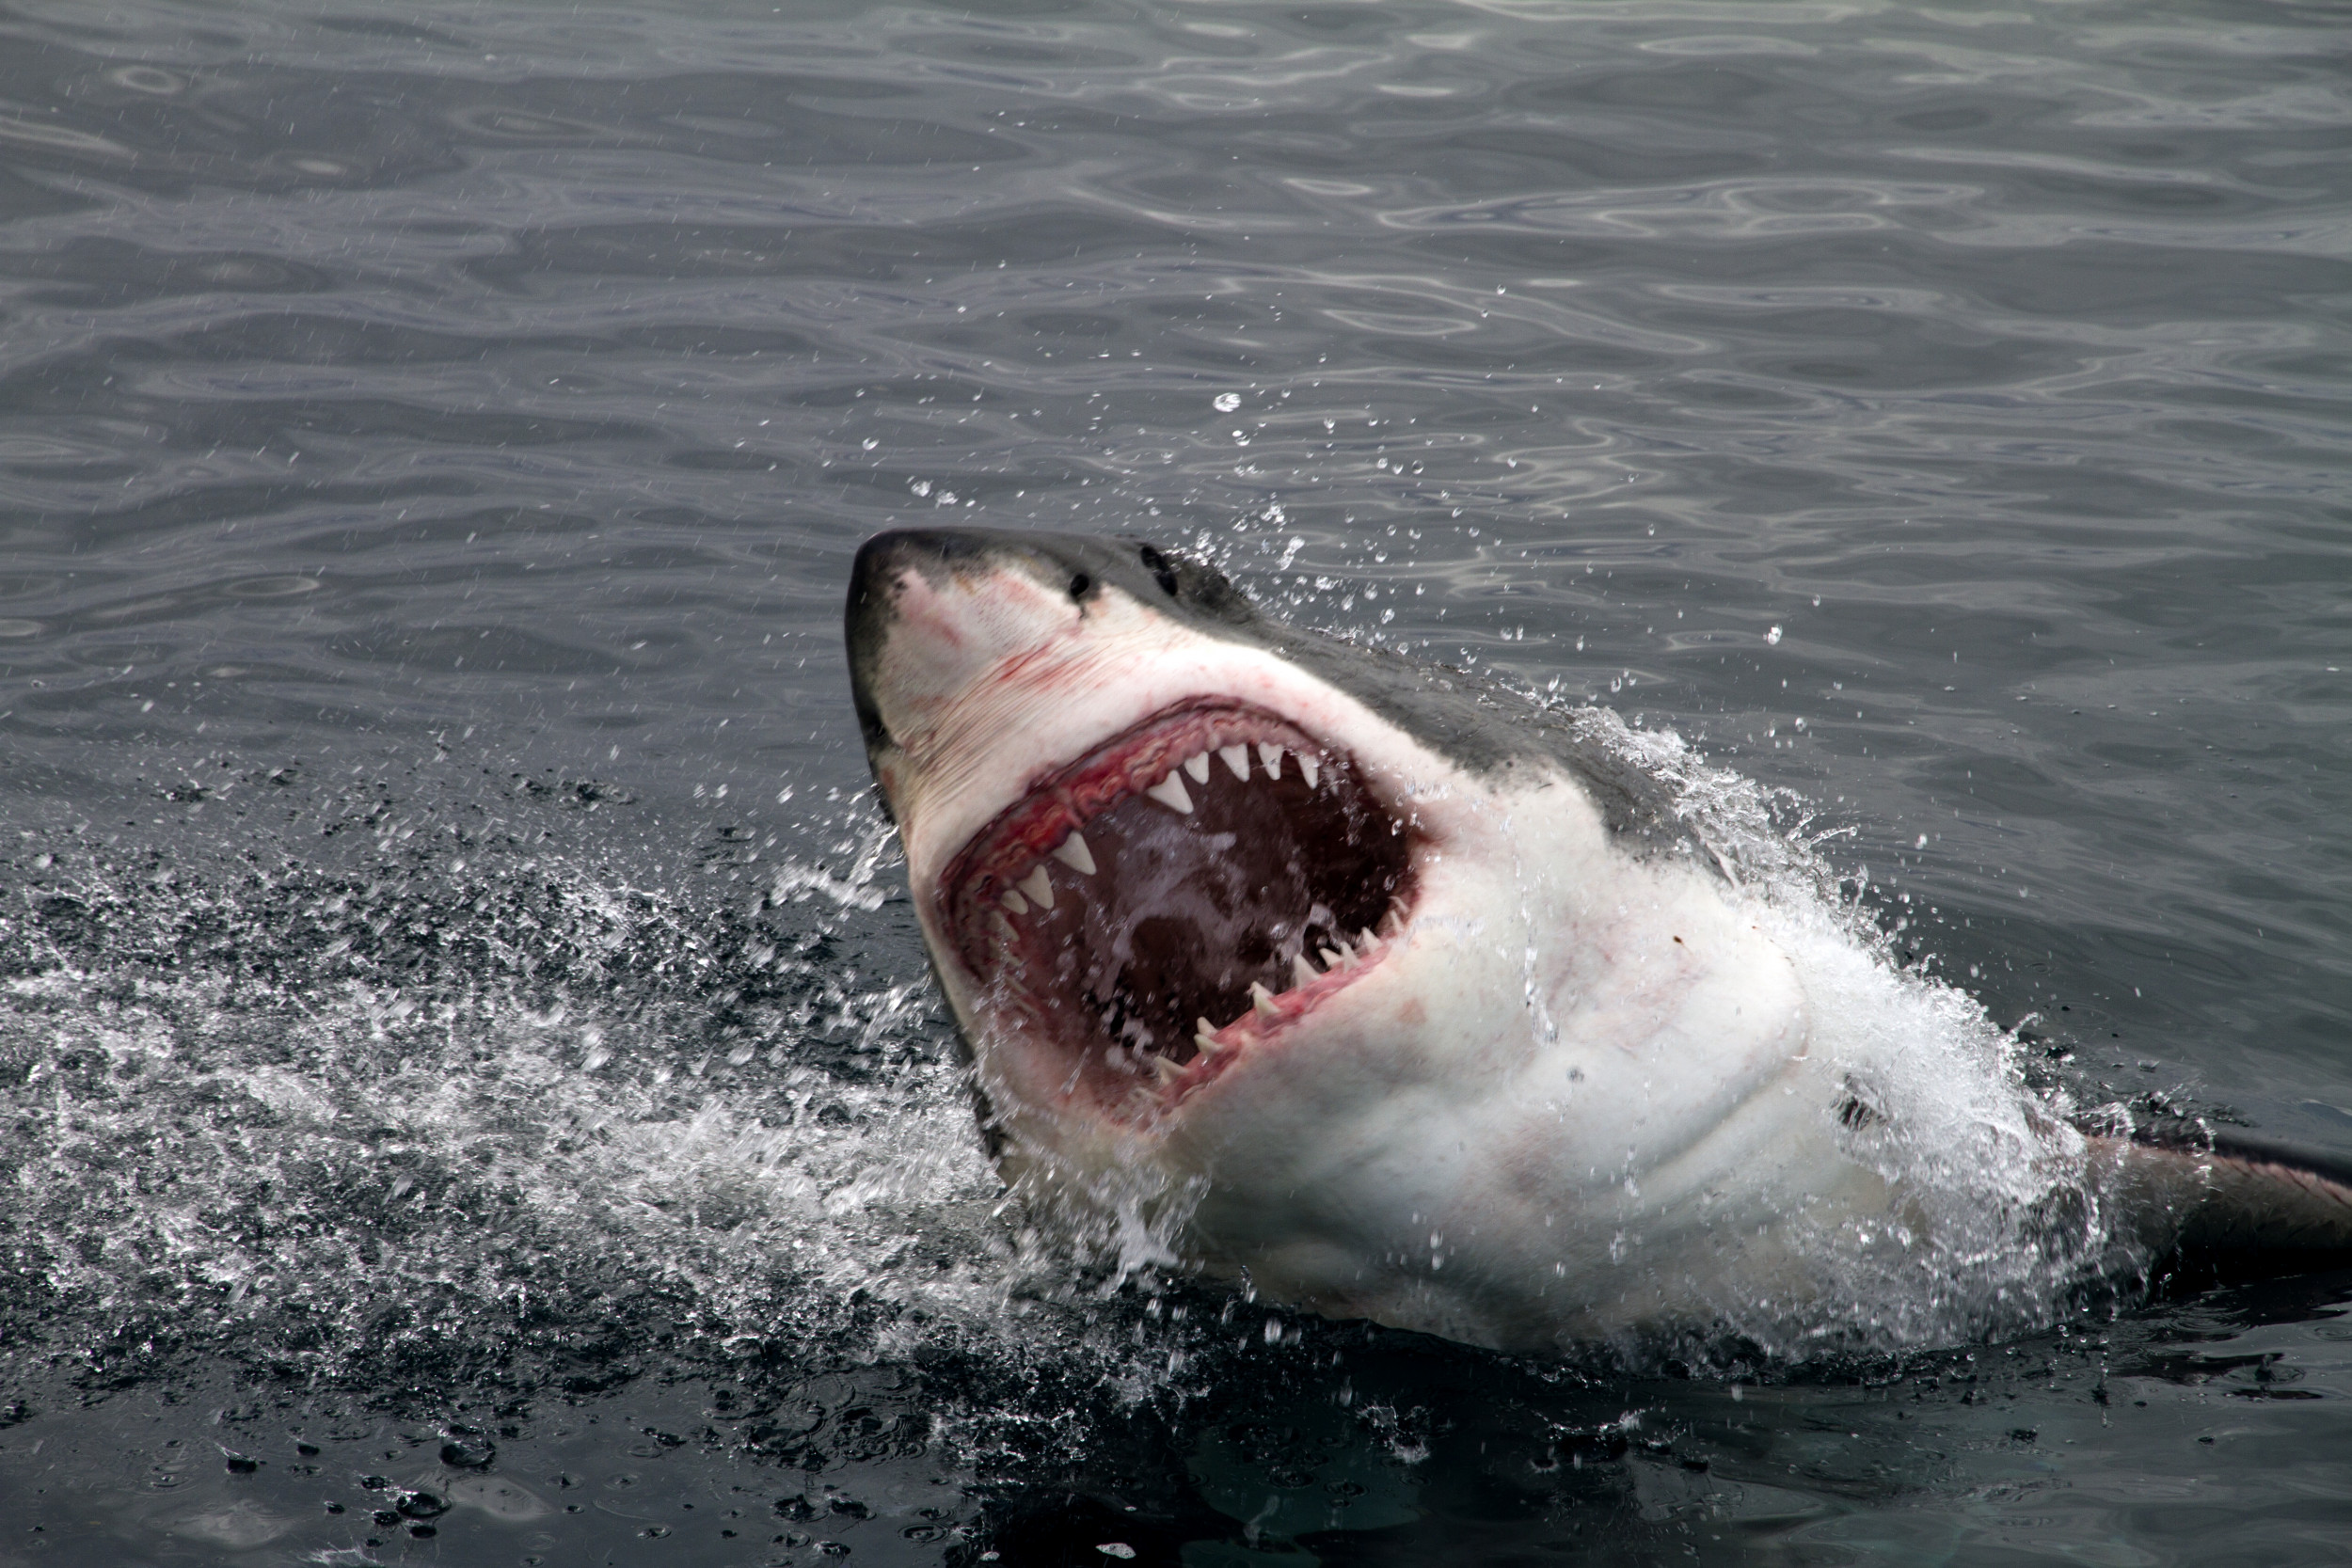 Enormous Great White Shark Is Now Just 20 Miles From North Carolina Coast